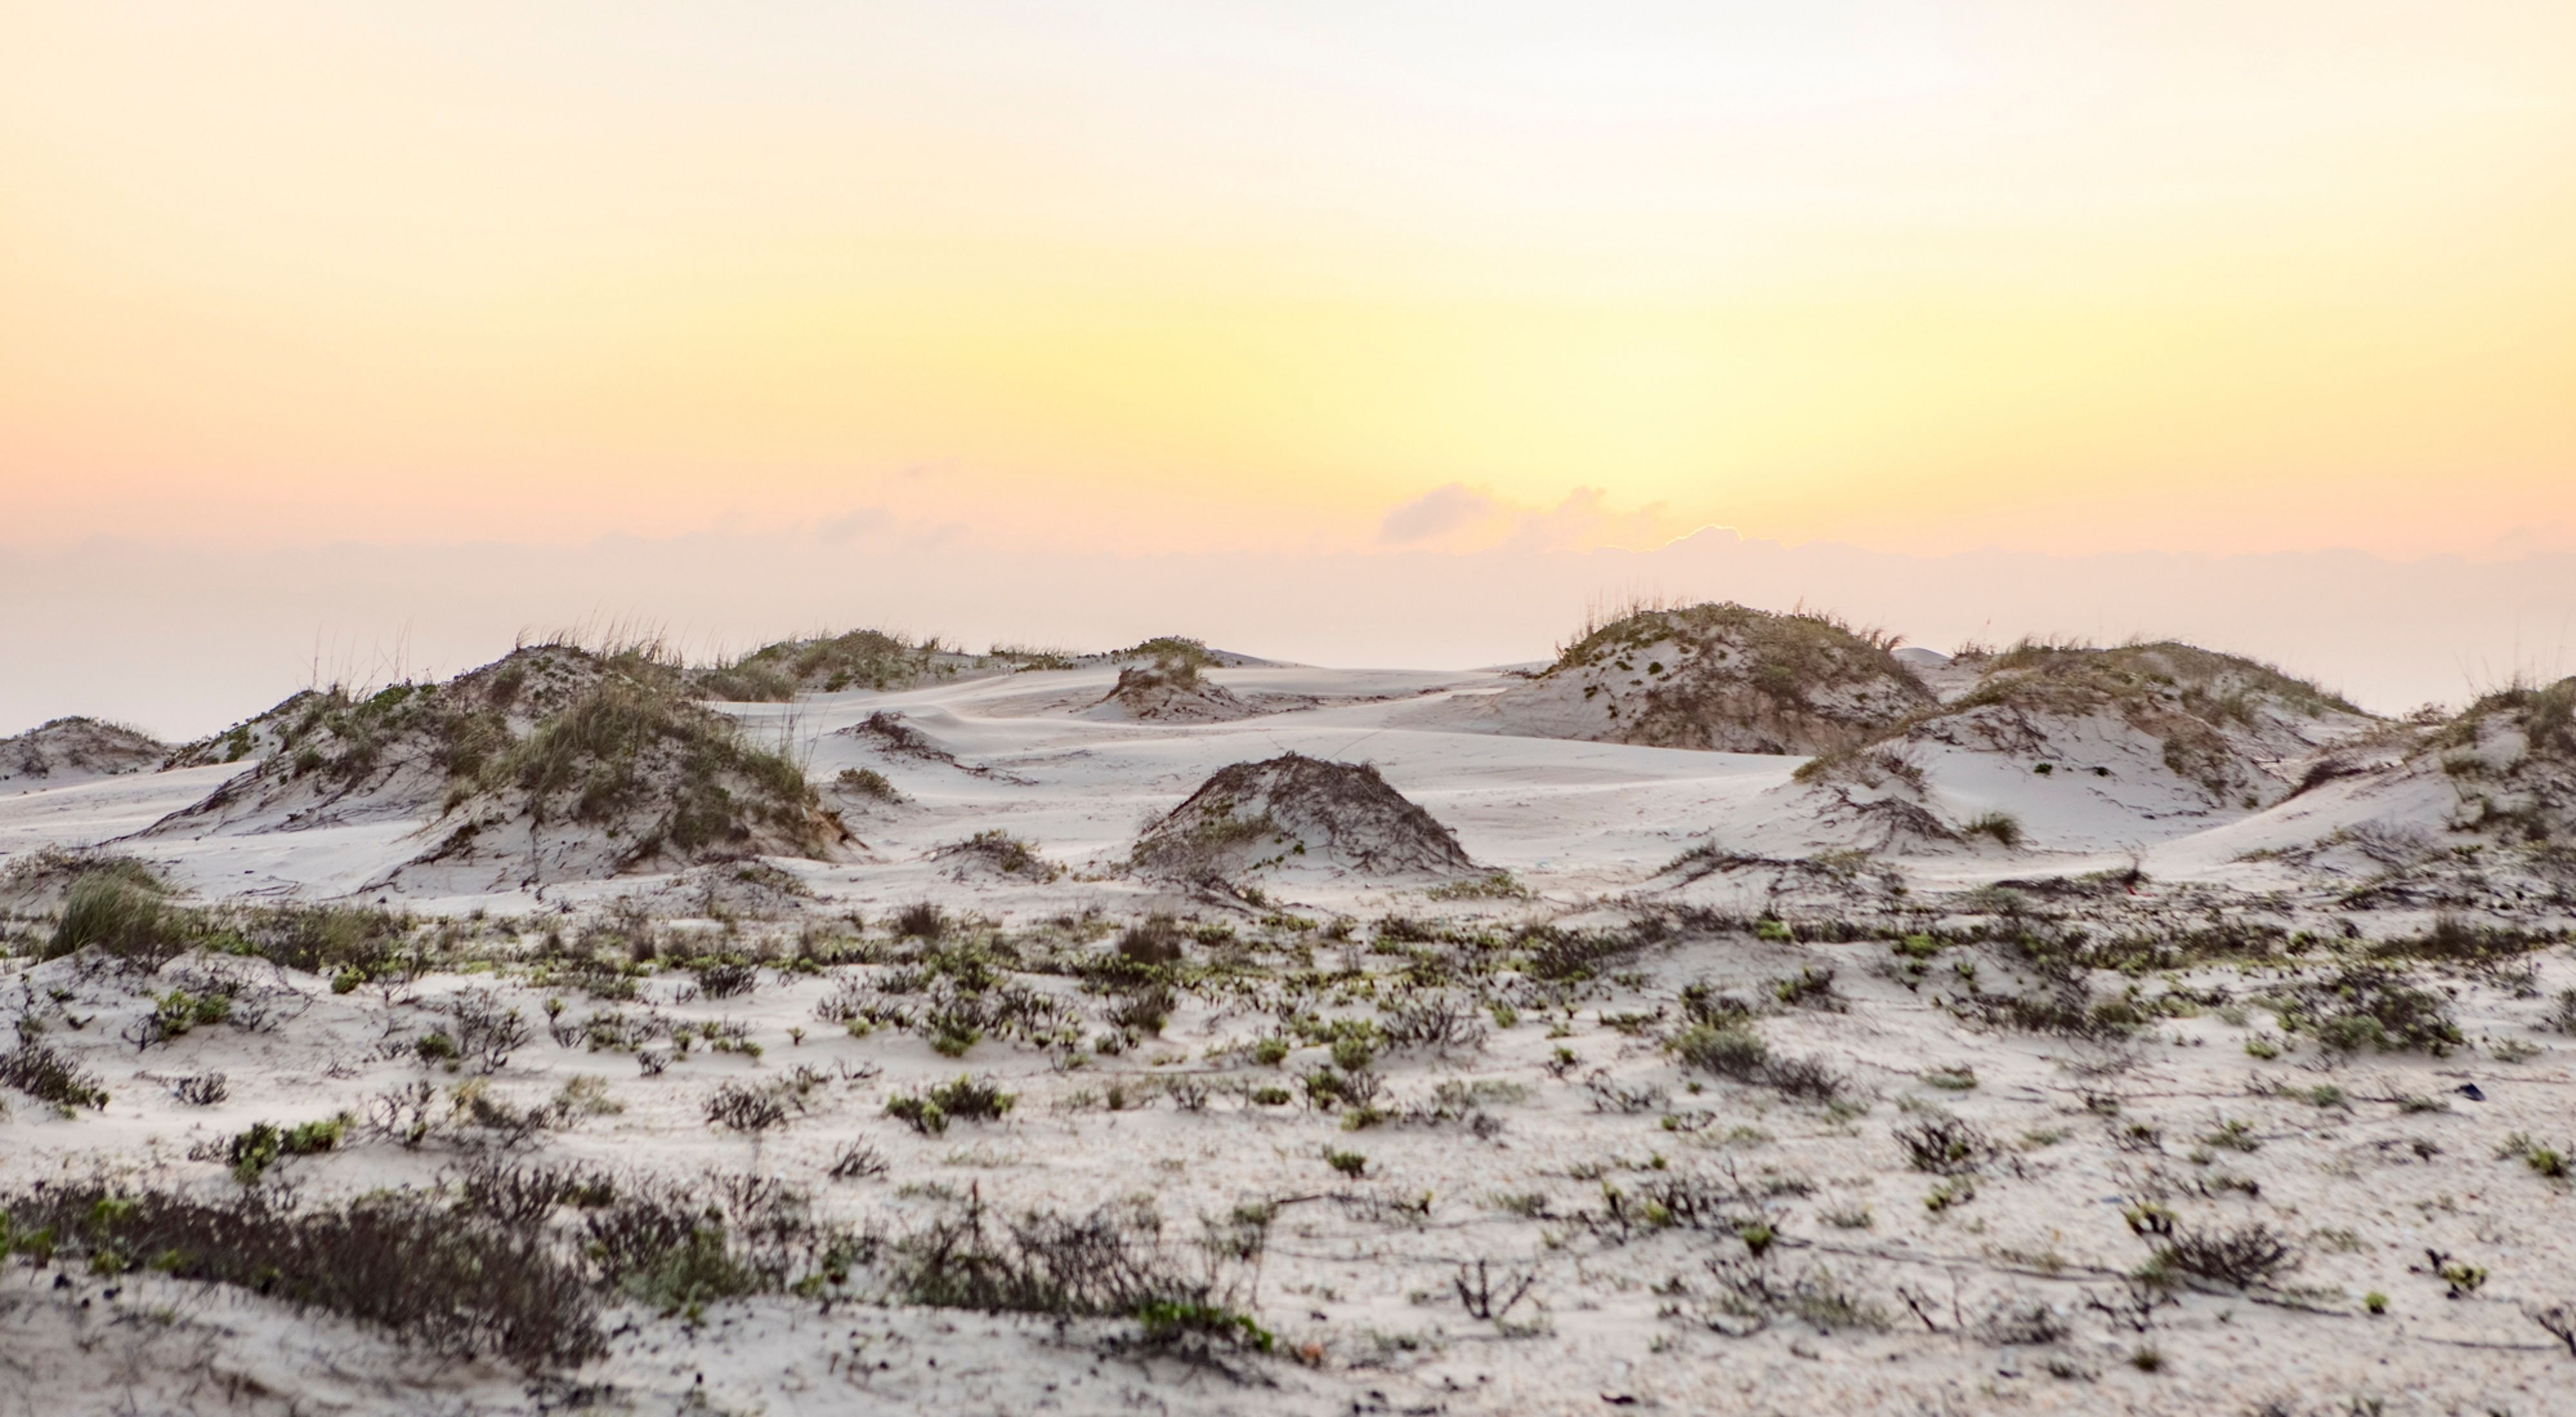 White sand dunes at sunset with some dune grasses growing on them.